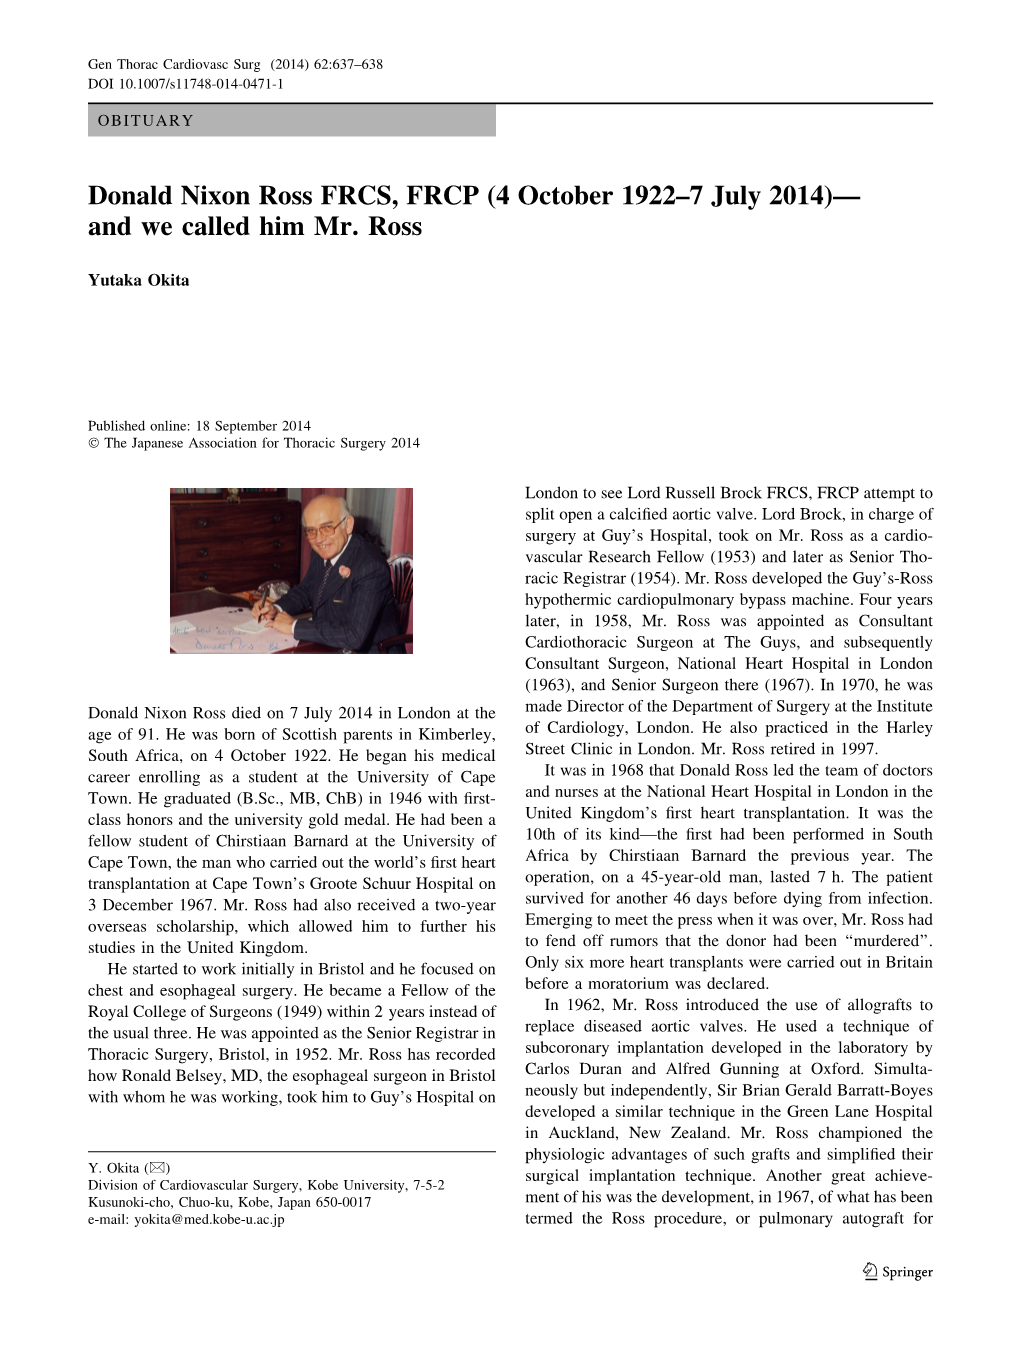 Donald Nixon Ross FRCS, FRCP (4 October 1922–7 July 2014)— and We Called Him Mr